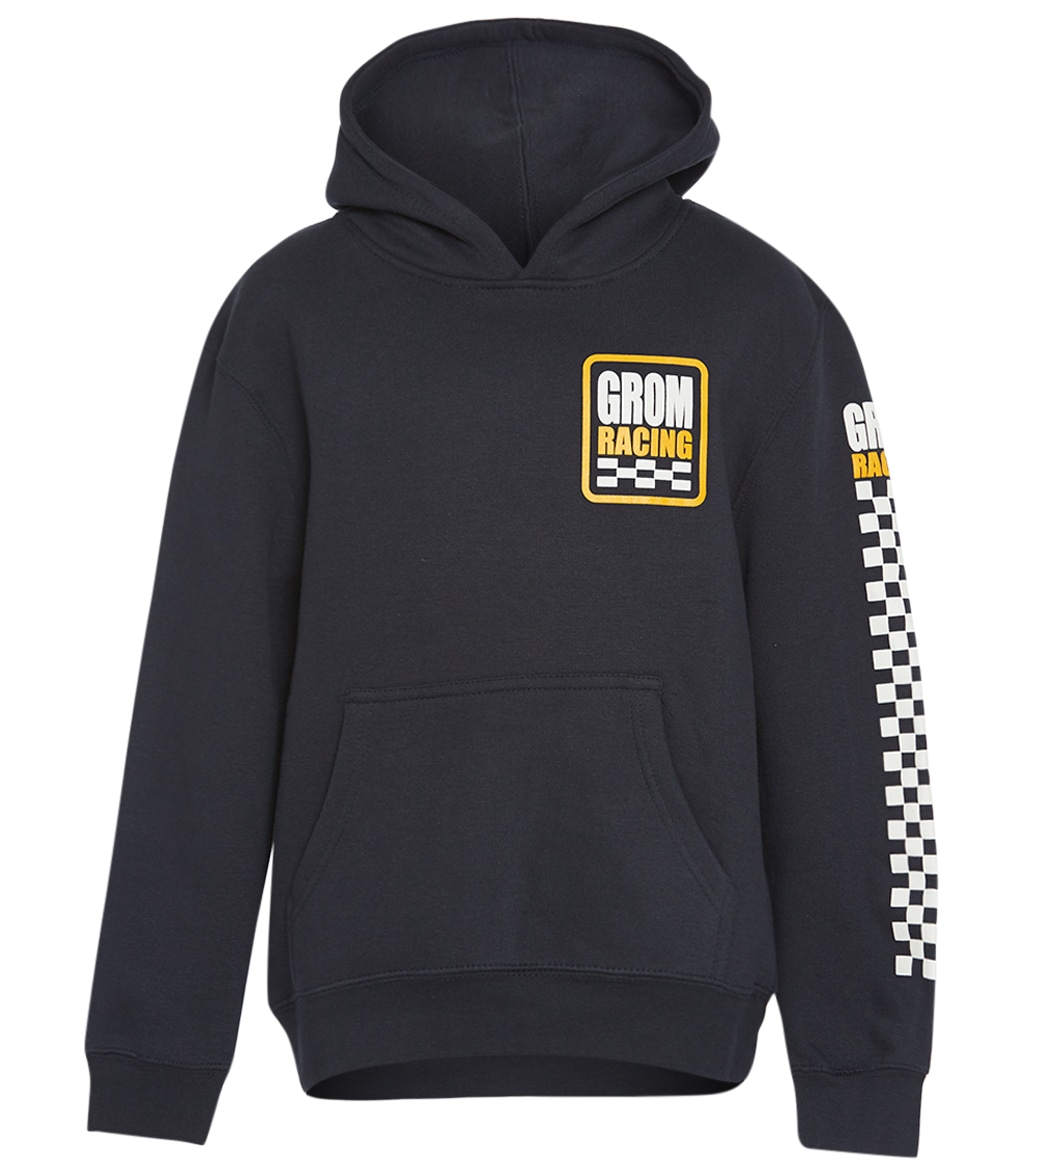 Grom Boys' Racing Pullover Hoodie - Navy Large Cotton/Polyester - Swimoutlet.com